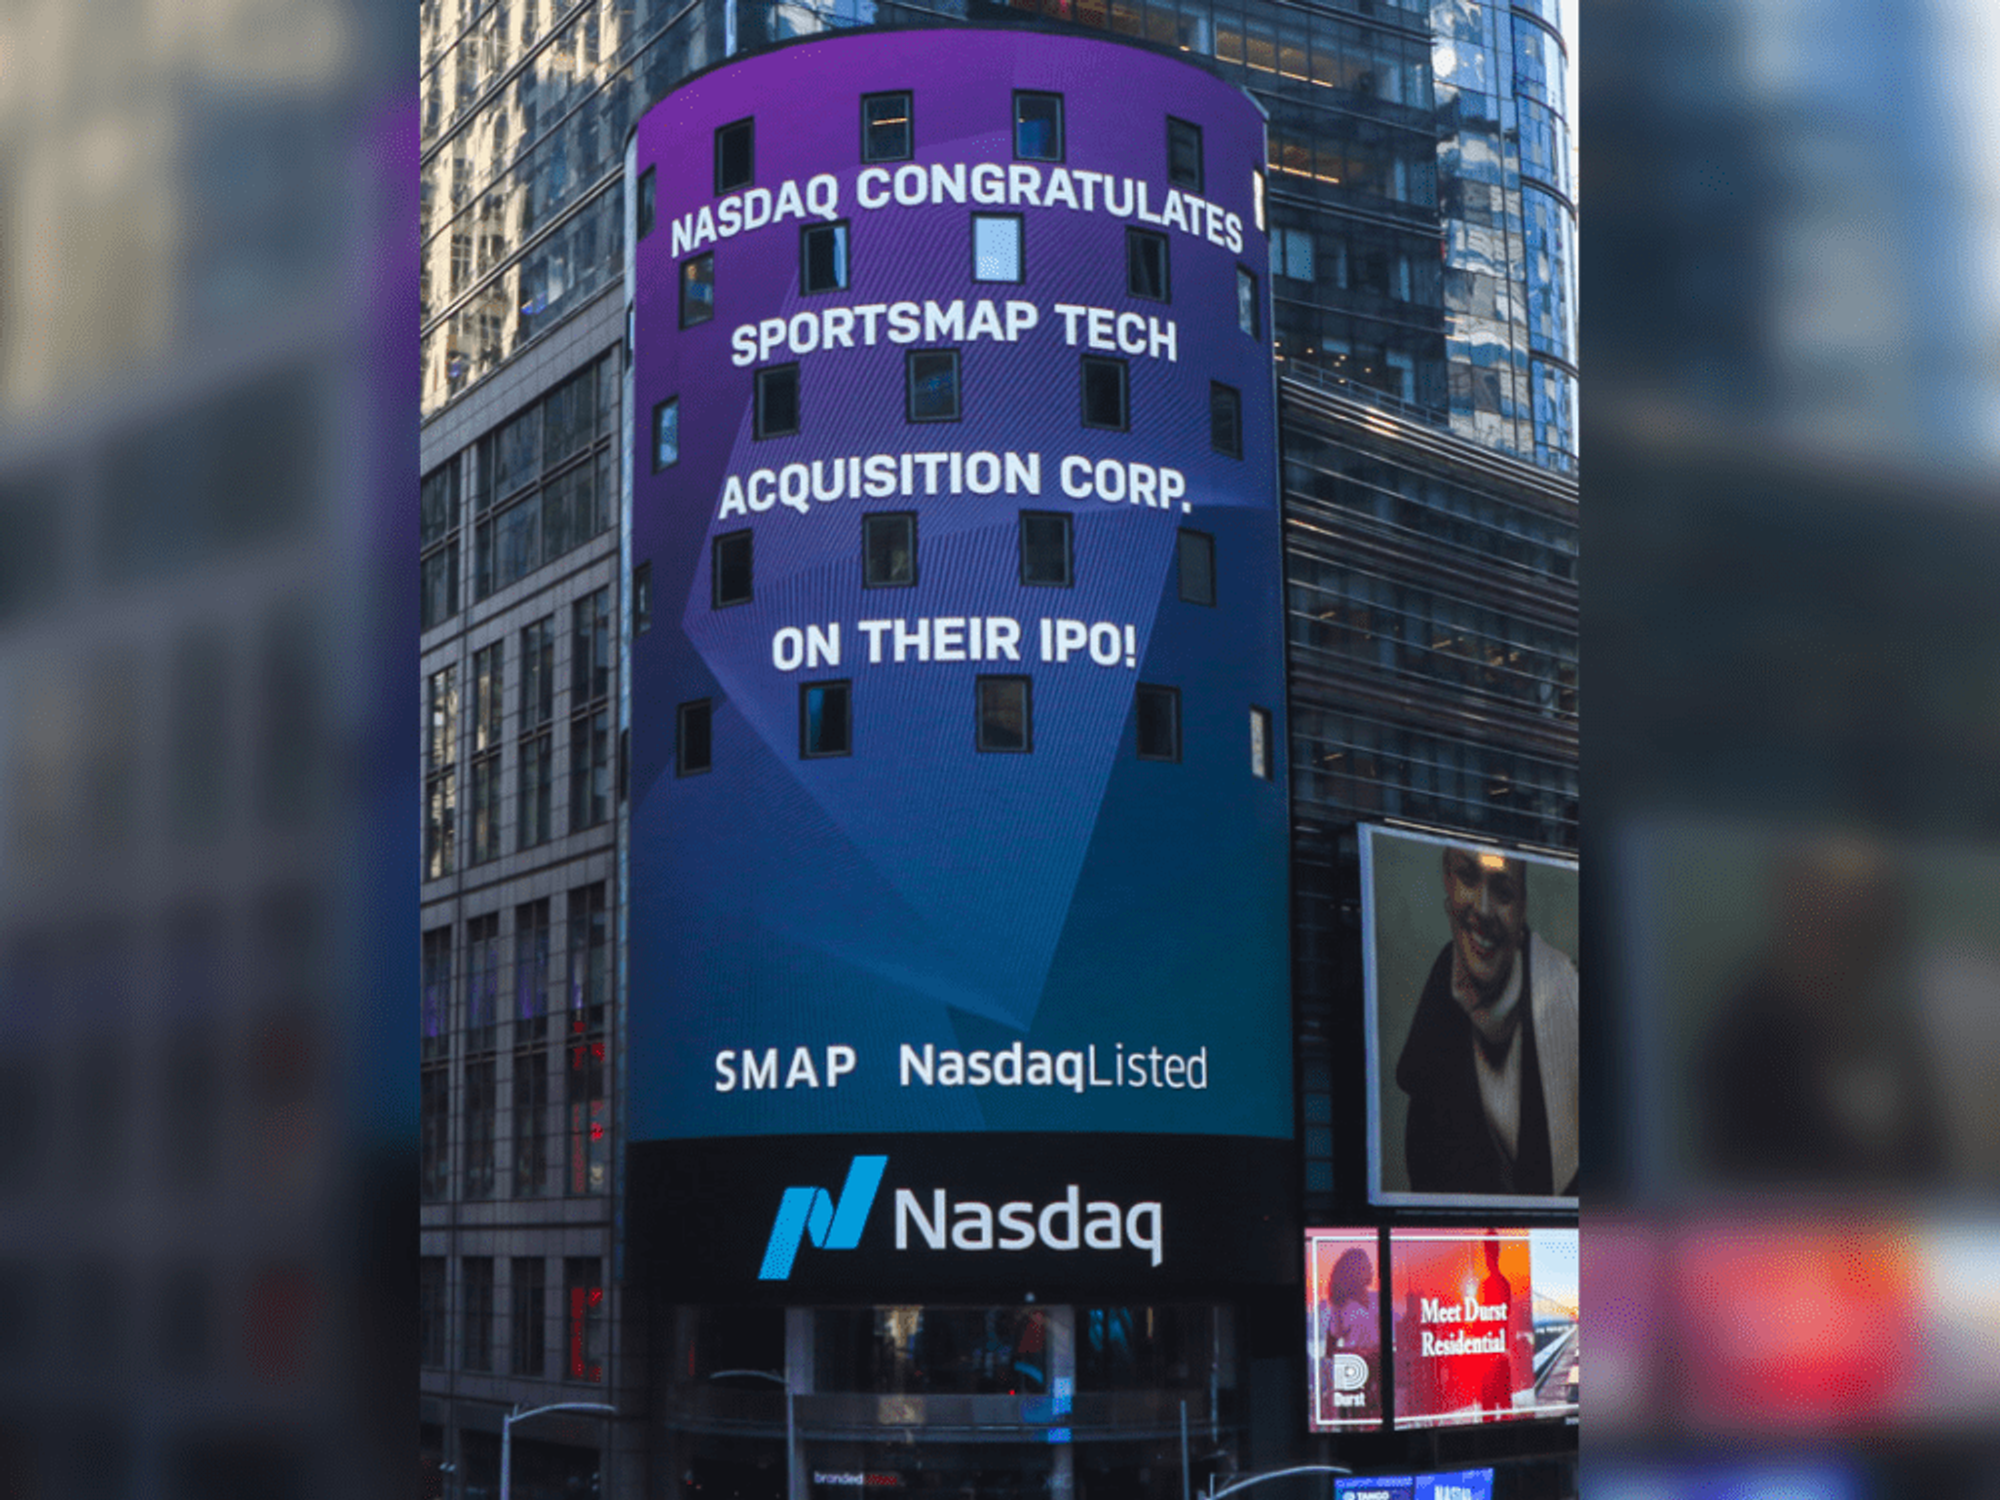 Houston's SportsMap Tech, led by David Gow, is officially on the NASDAQ.